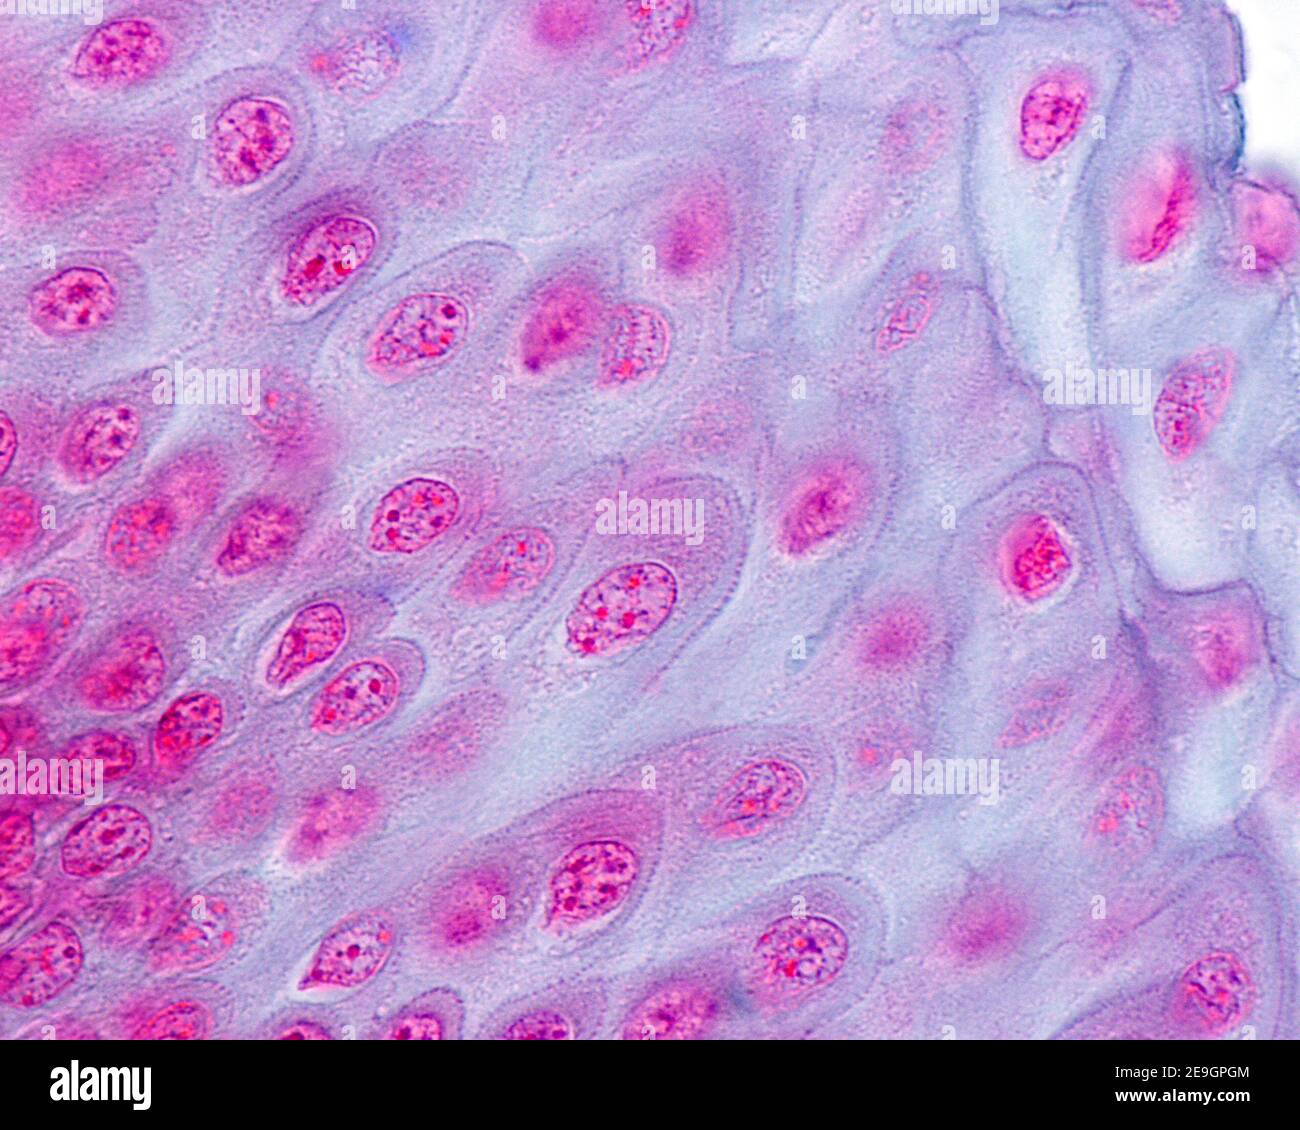 High magnification micrograph of non-keratinized squamous stratified epithelium of the esophagus showing desmosomes between the cells of the stratum s Stock Photo